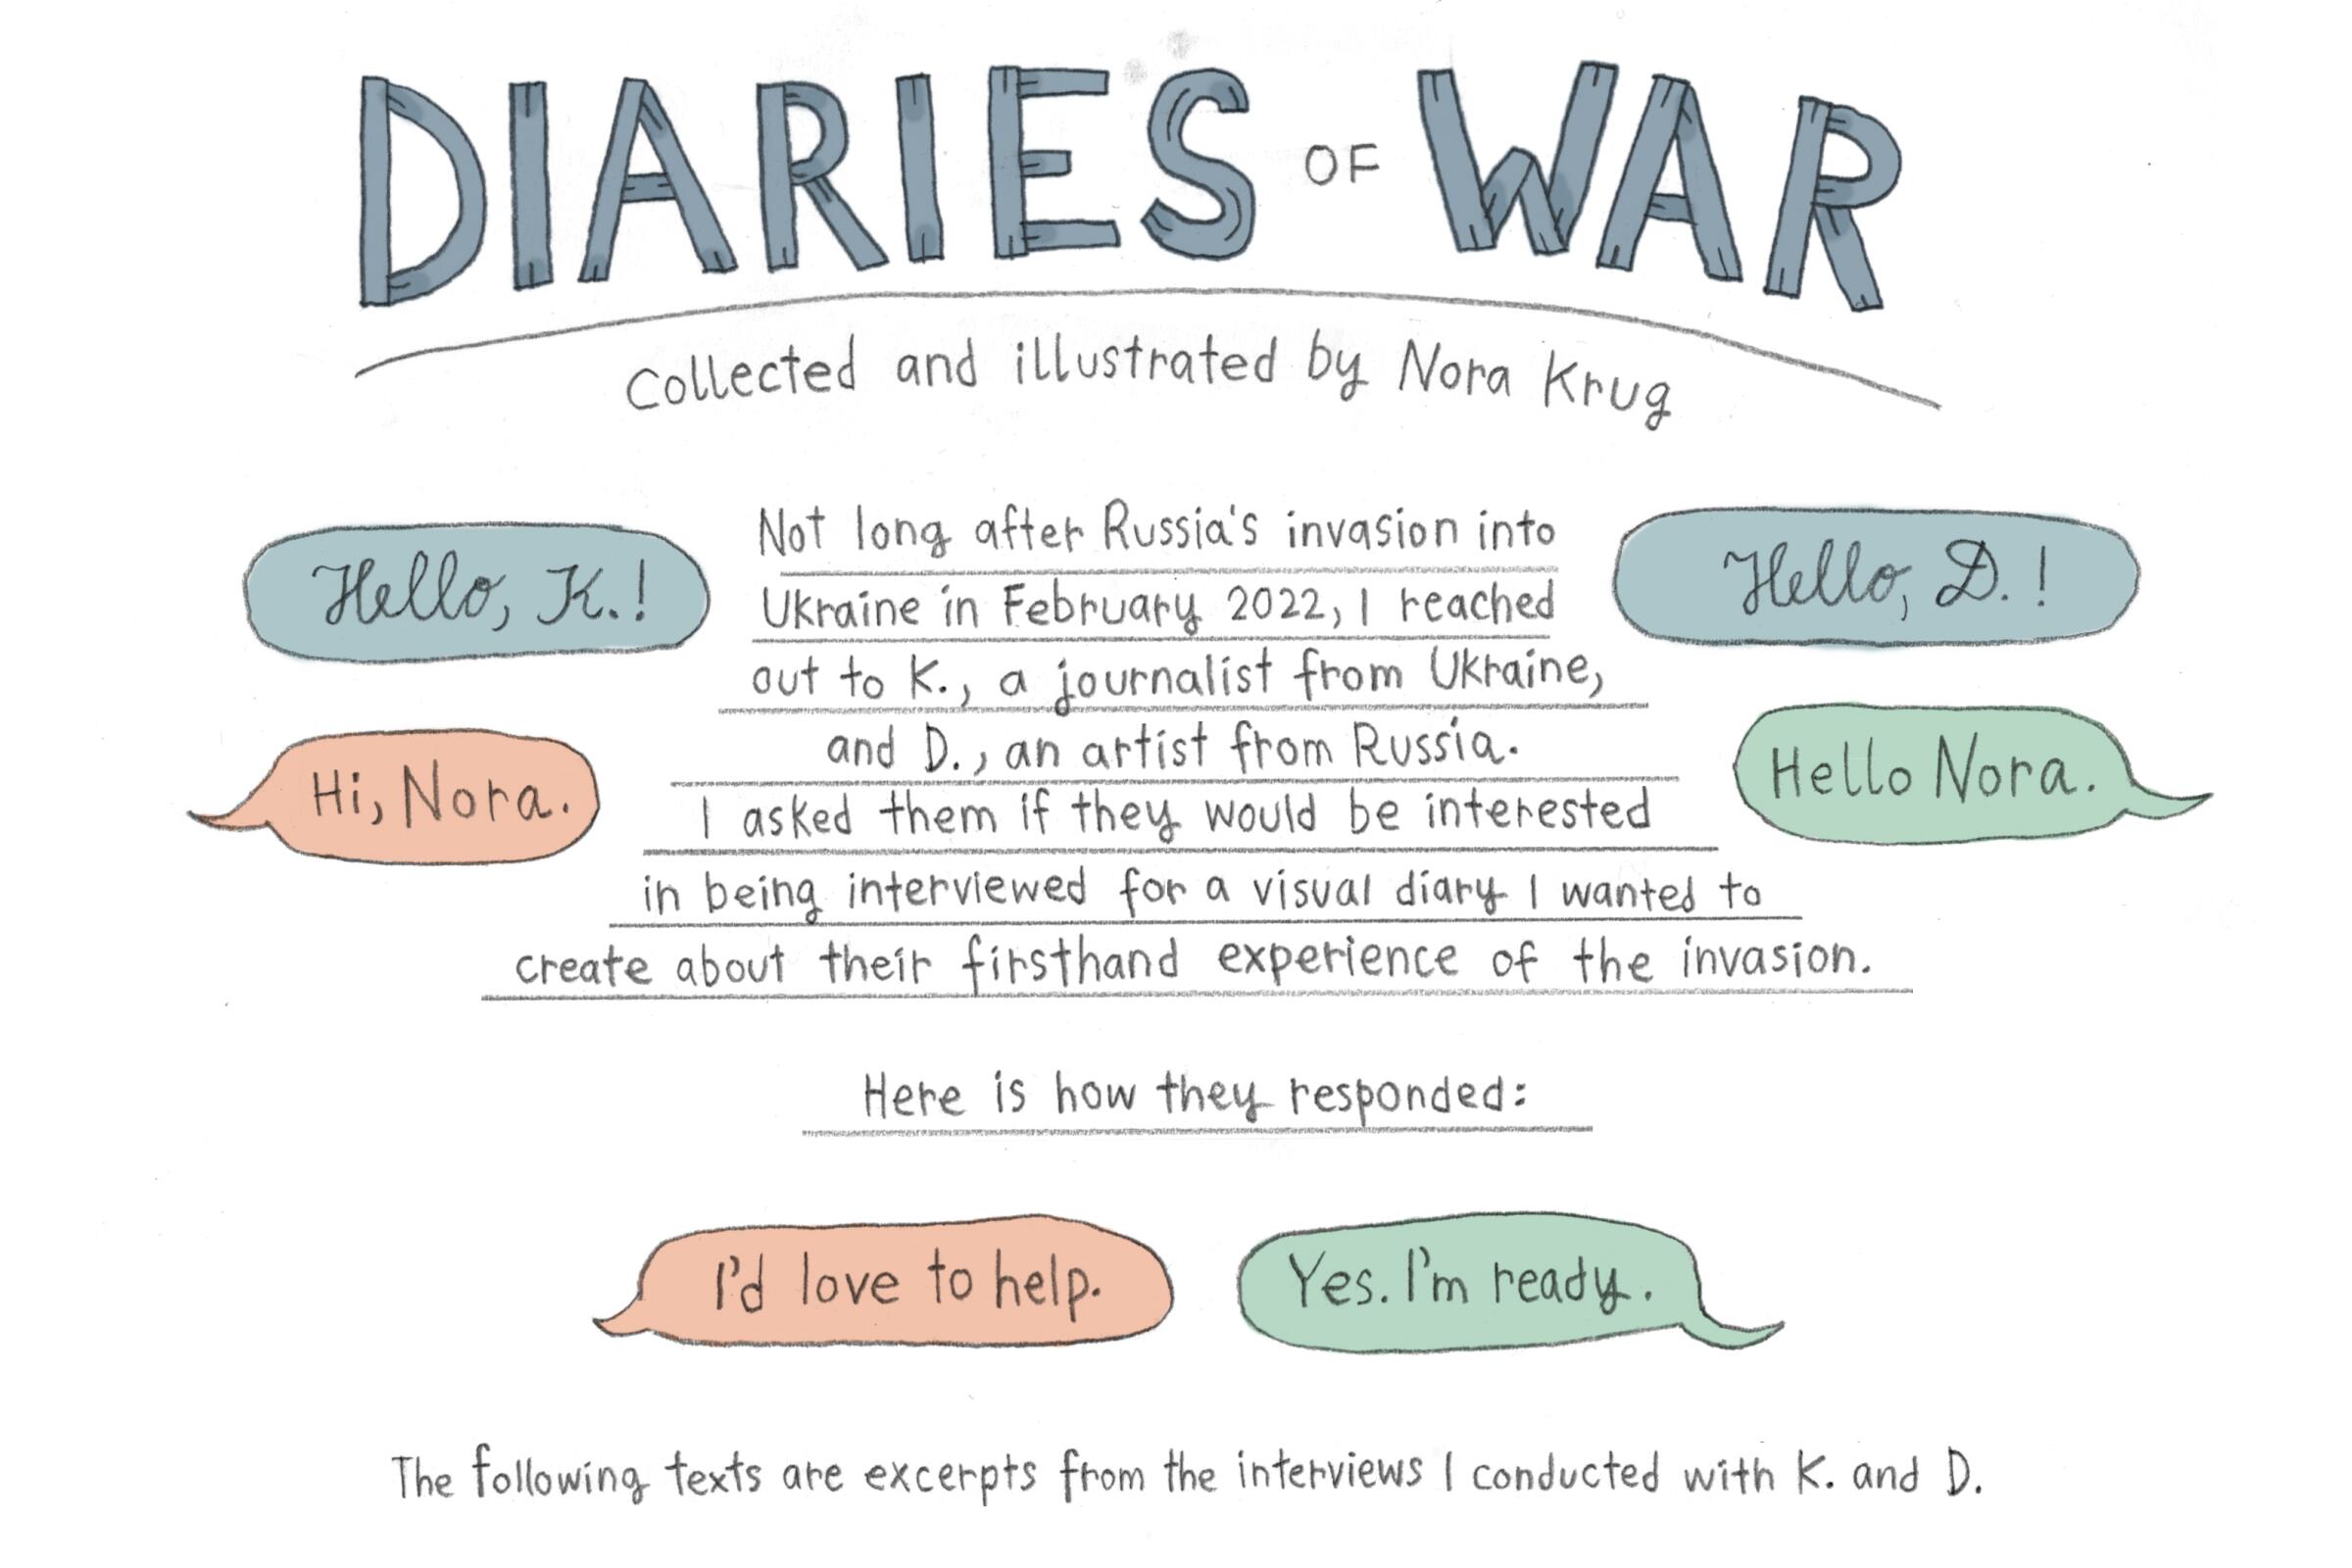 Diaries of War title image introducing the series.